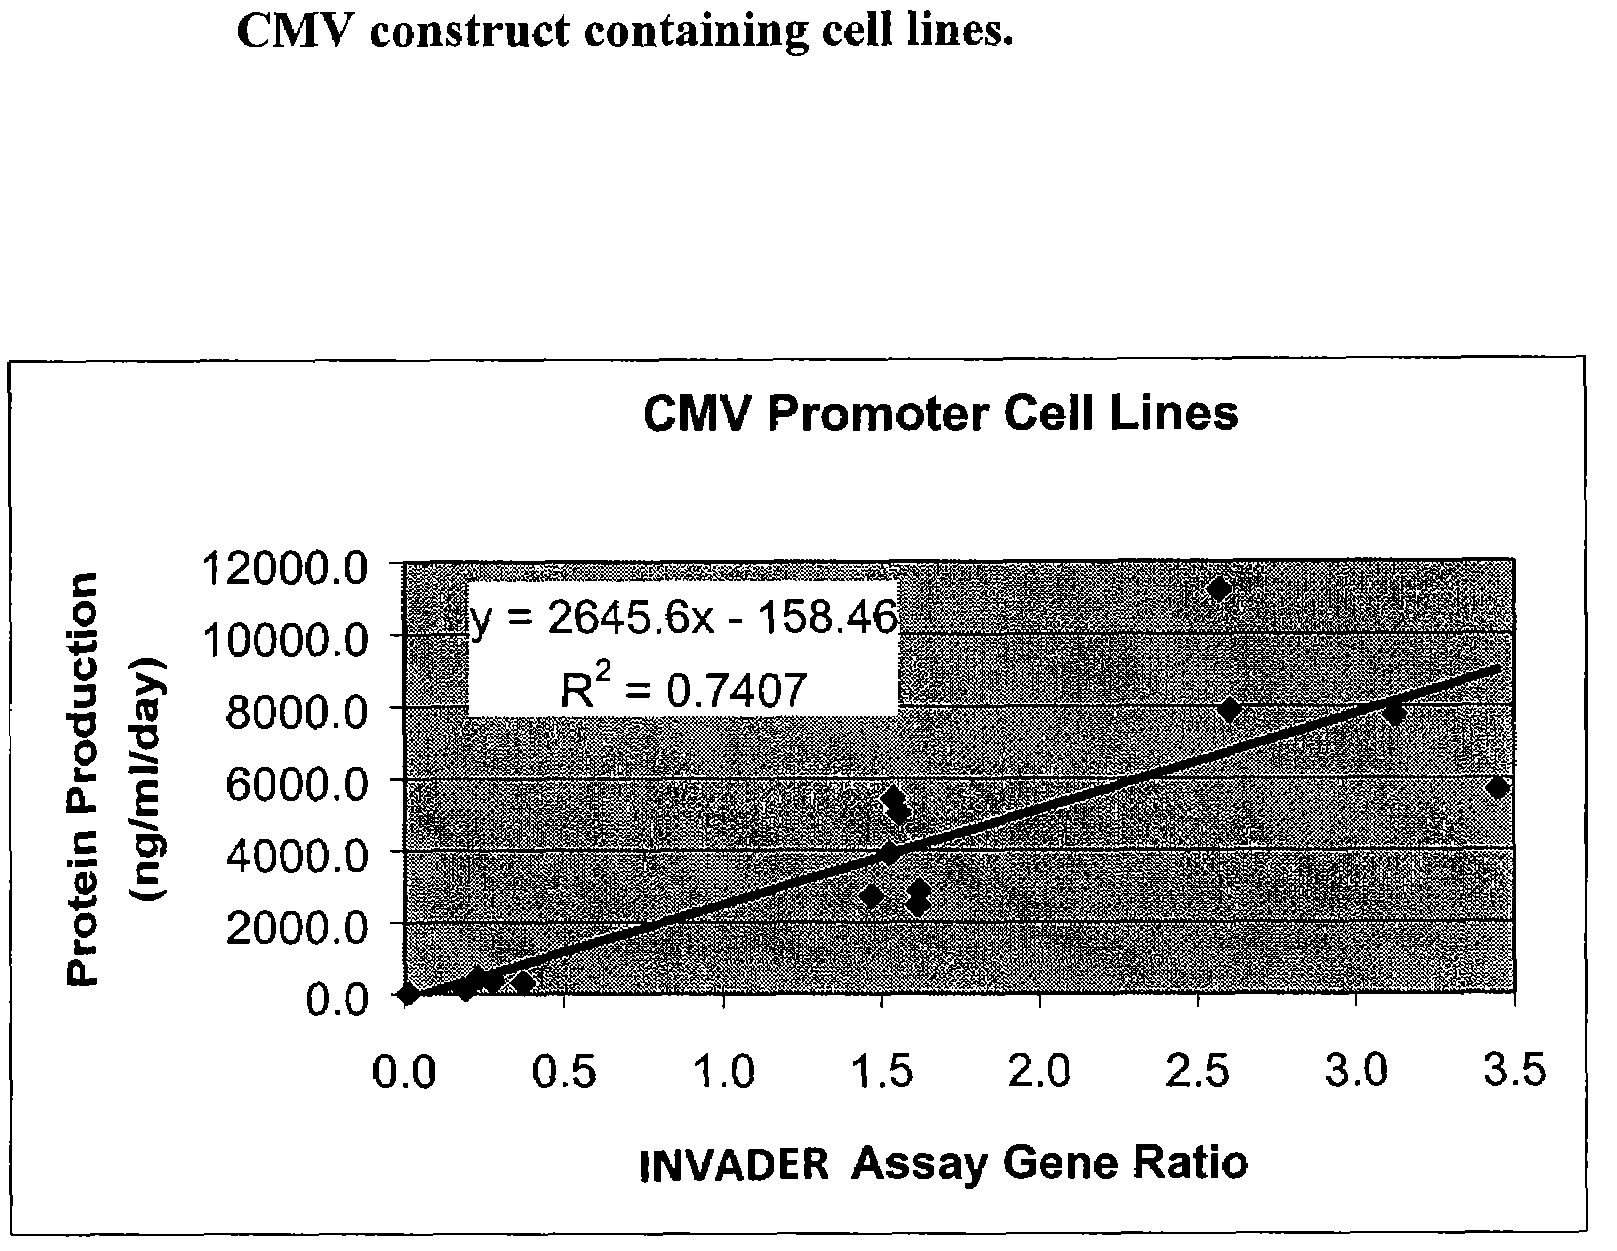 Host cells containing multiple integrating vectors